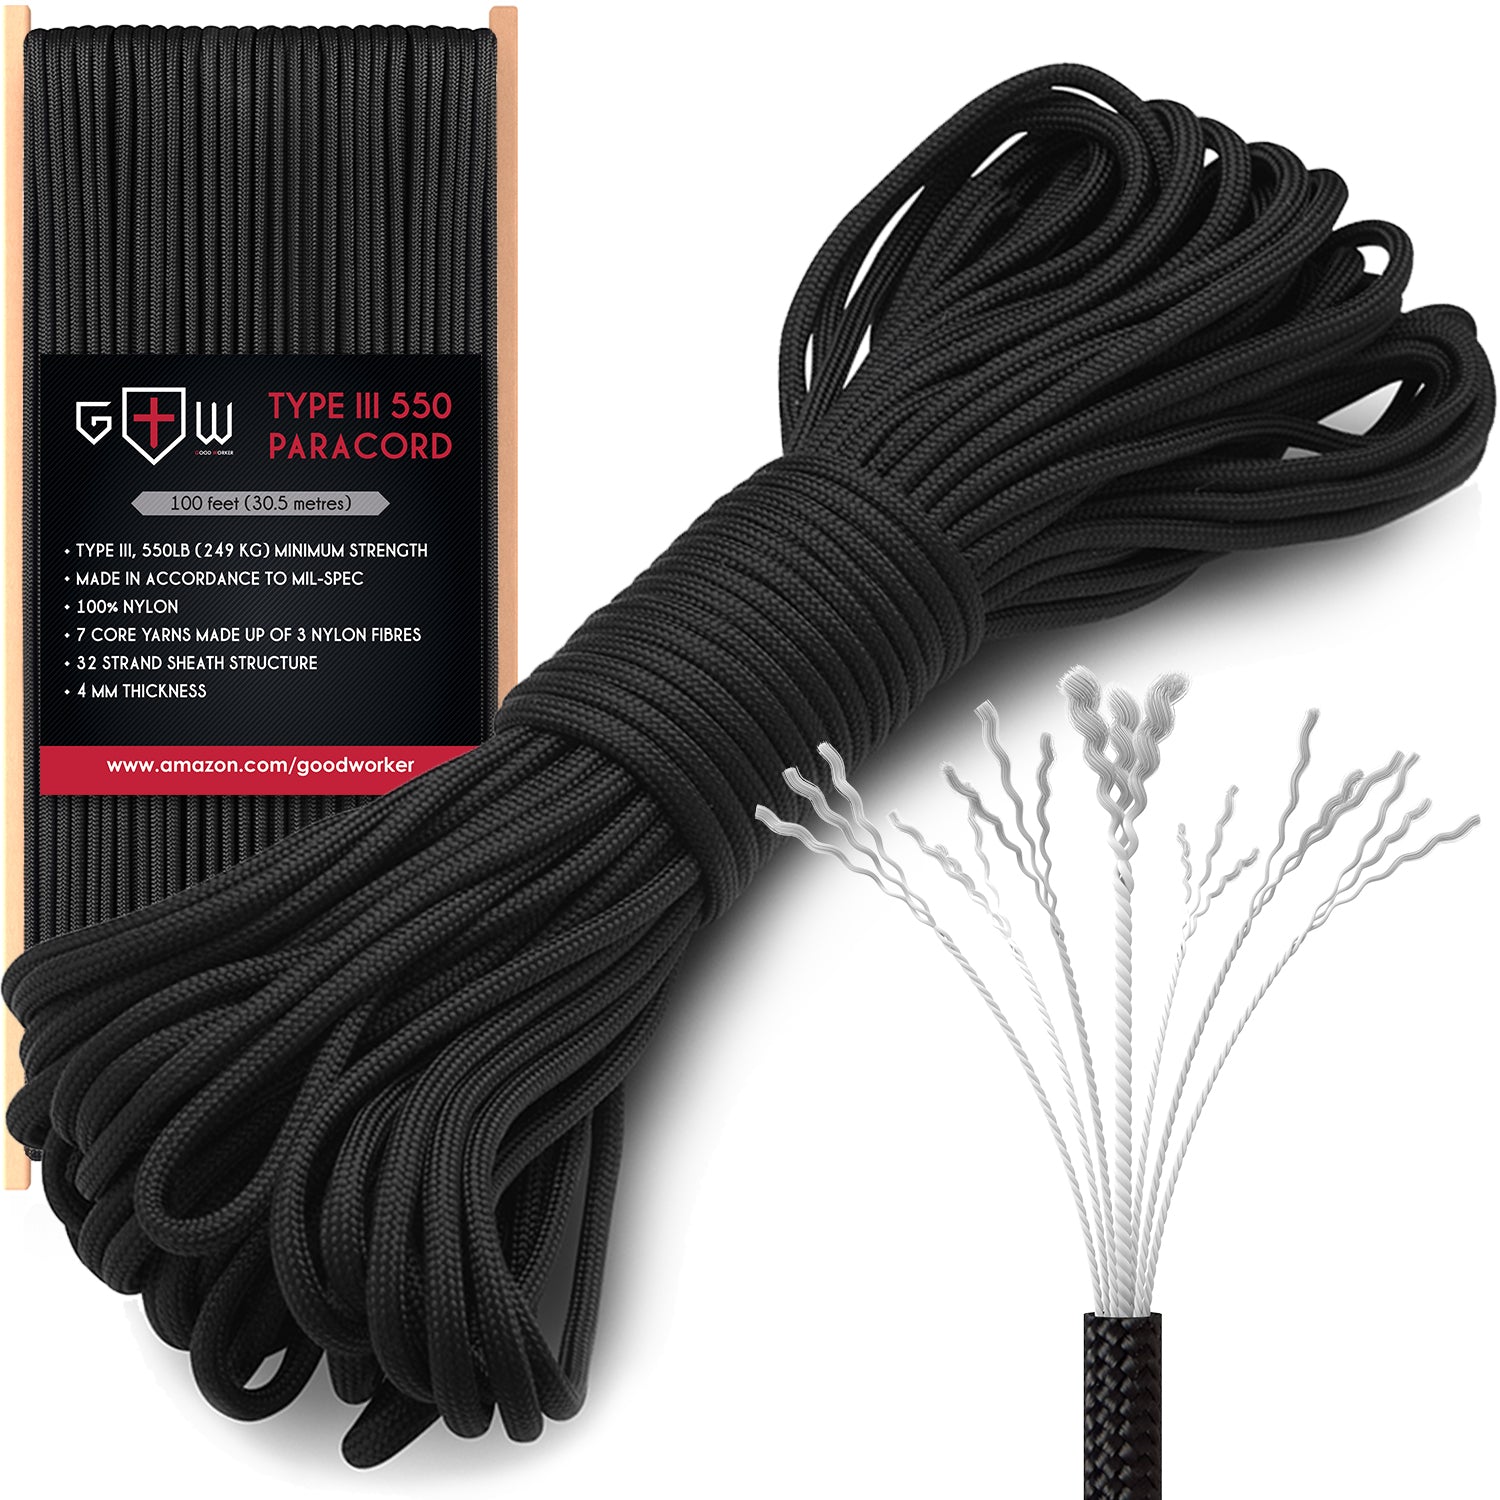 Grand Way 550 Mil-Spec Paracord Type III (100ft; Black)